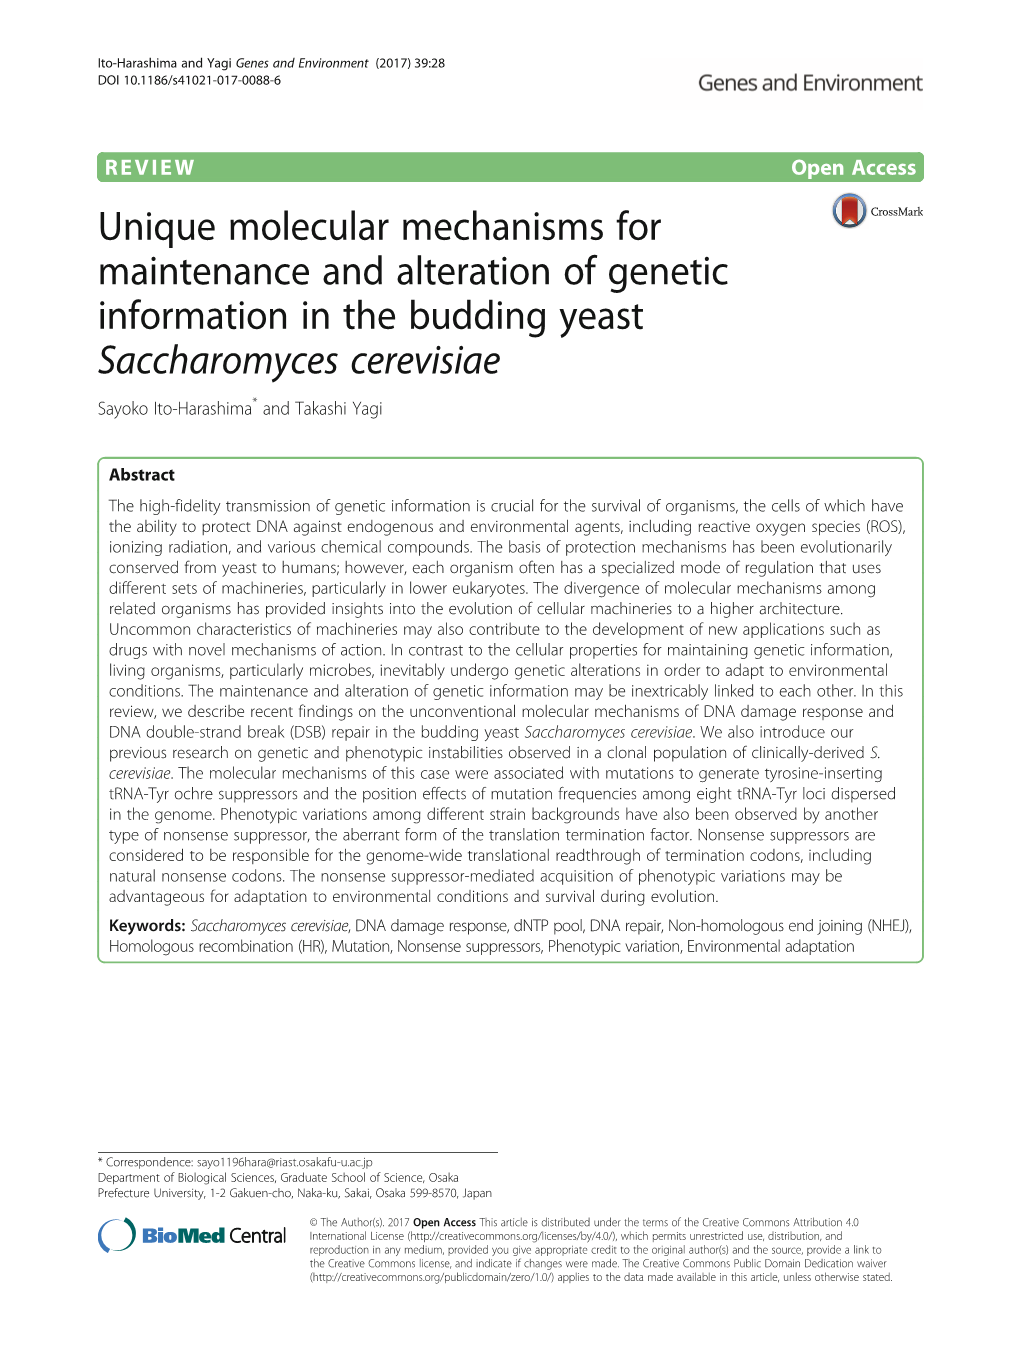 Unique Molecular Mechanisms for Maintenance and Alteration of Genetic Information in the Budding Yeast Saccharomyces Cerevisiae